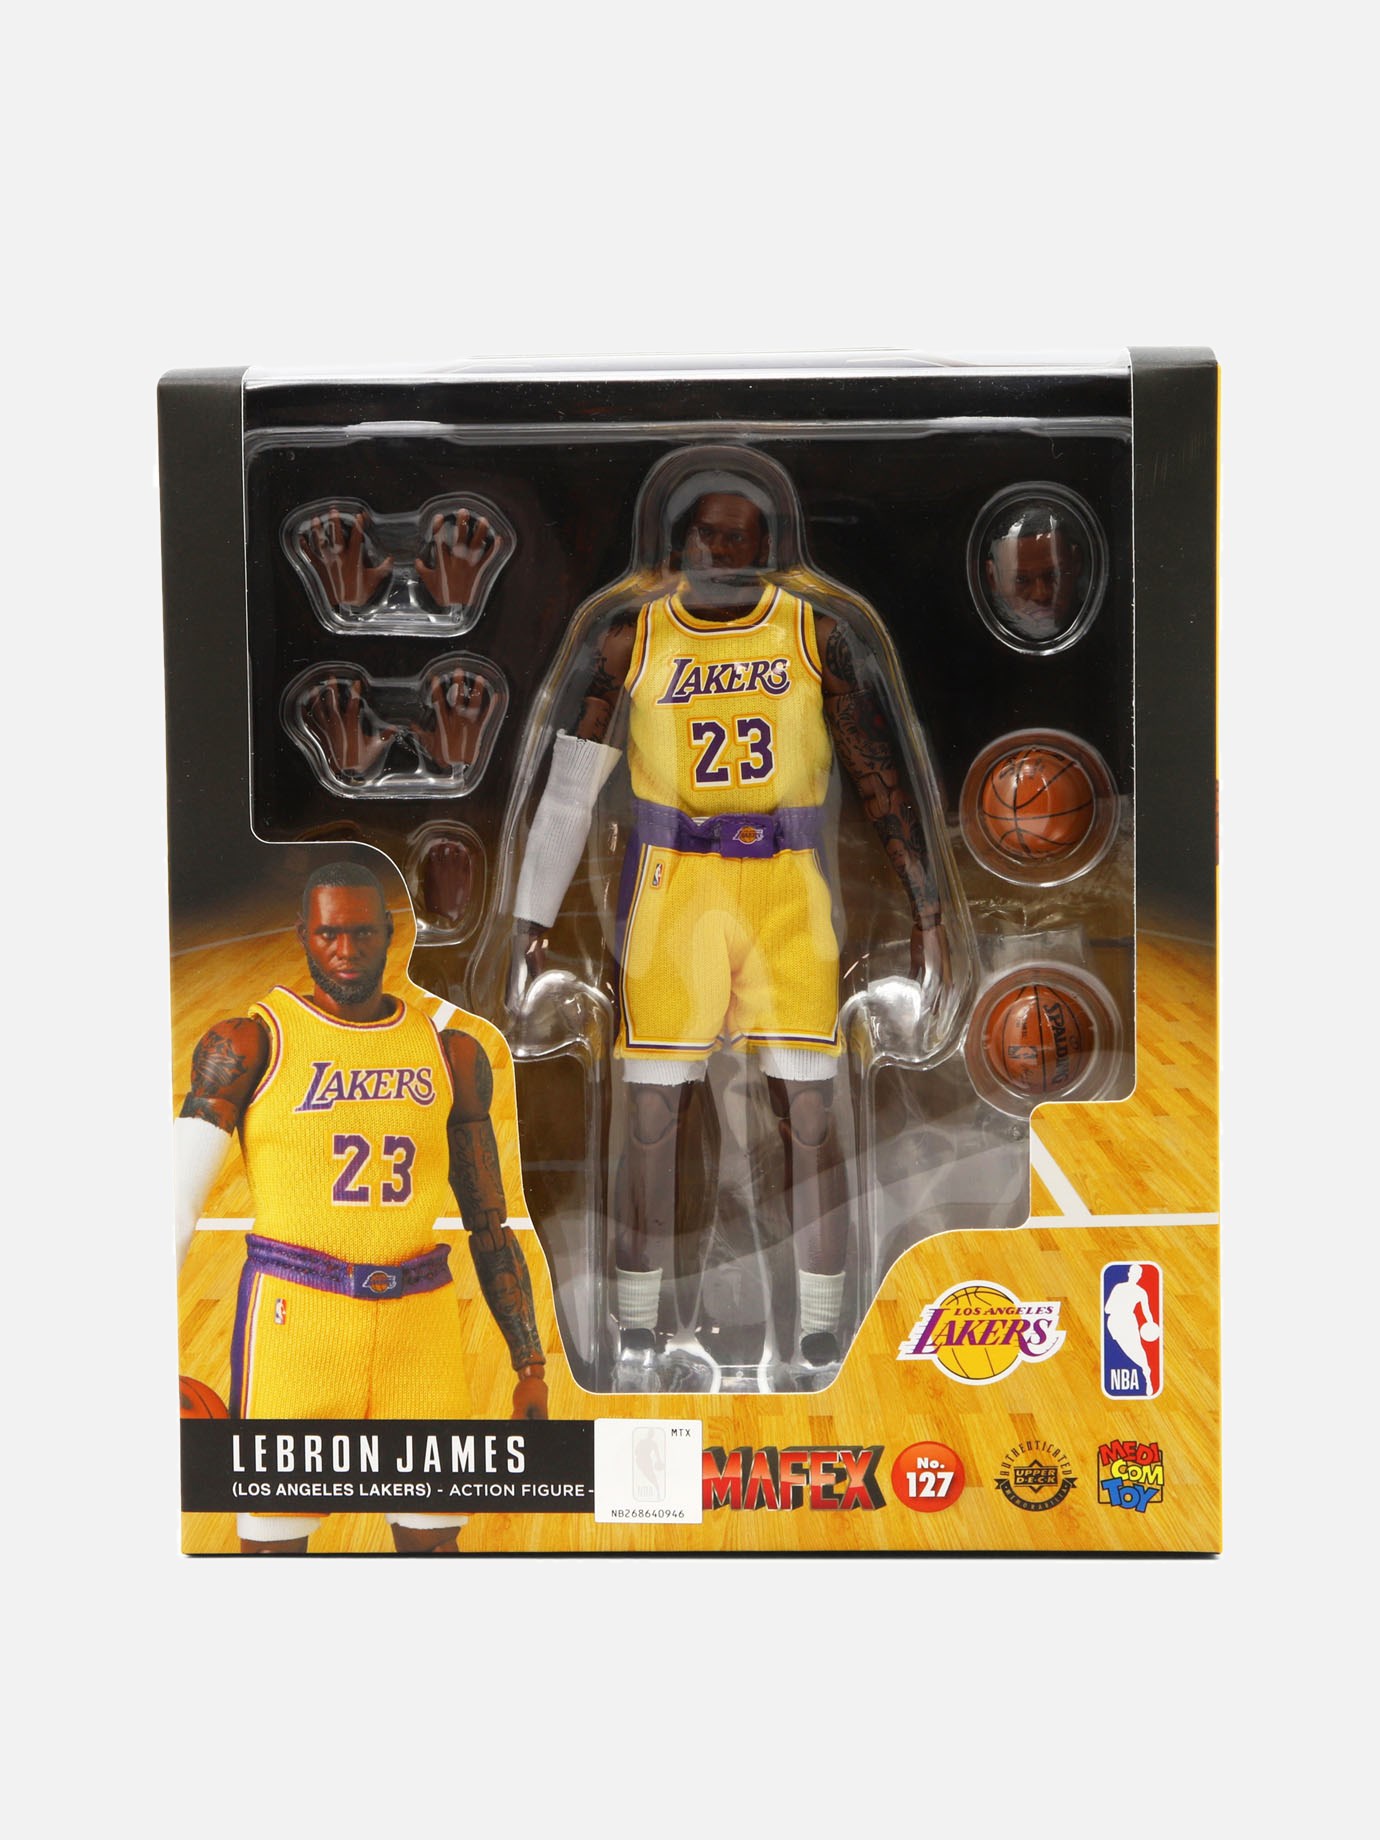 Mafex Lebron James Figure by Medicom Toy